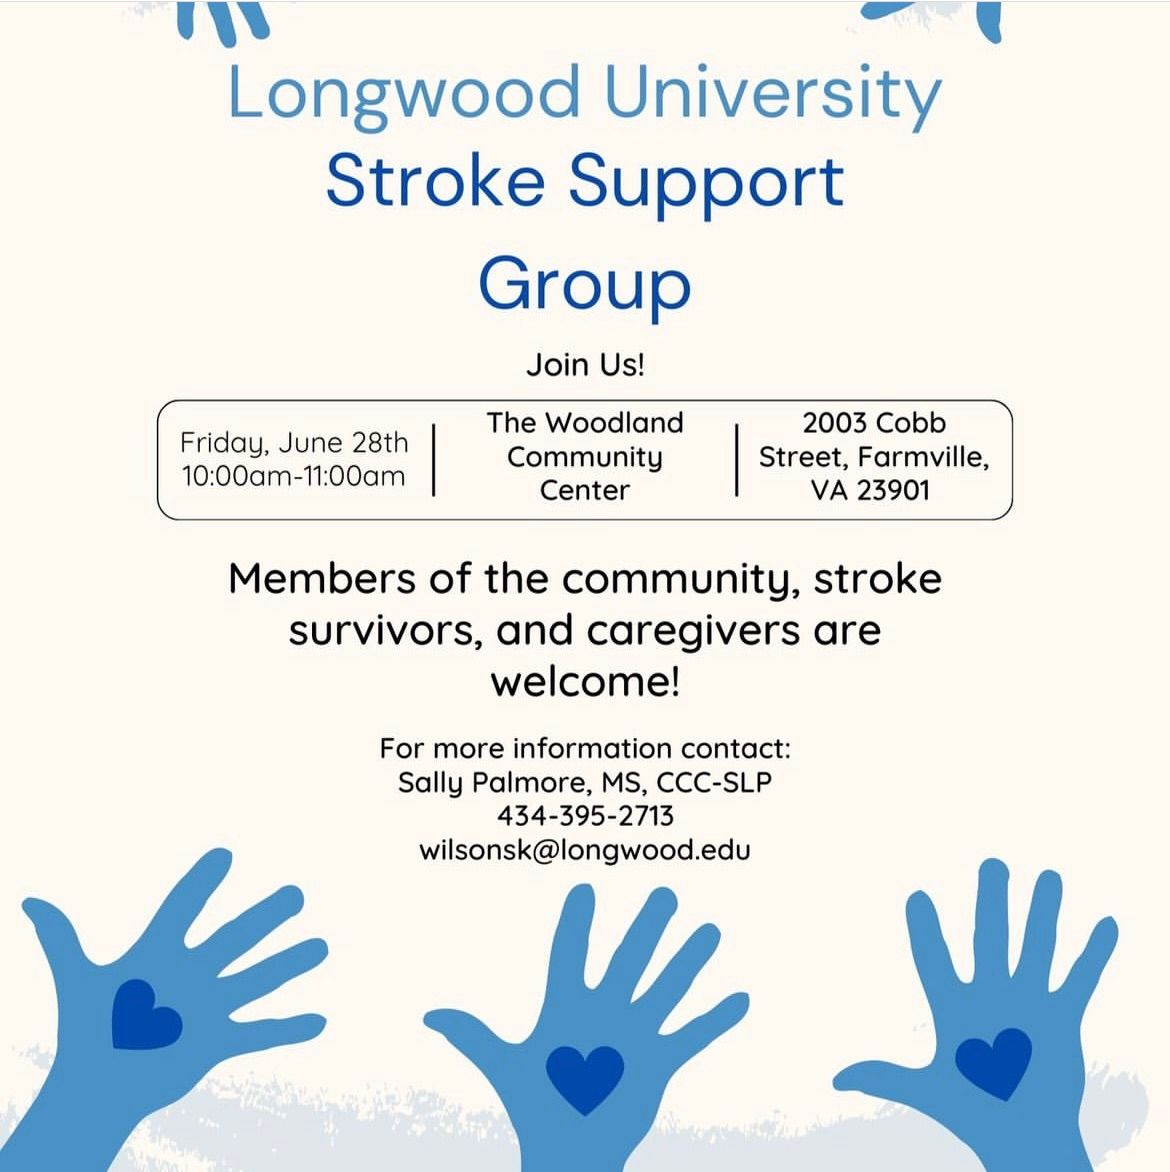 Stroke Support Group Meeting